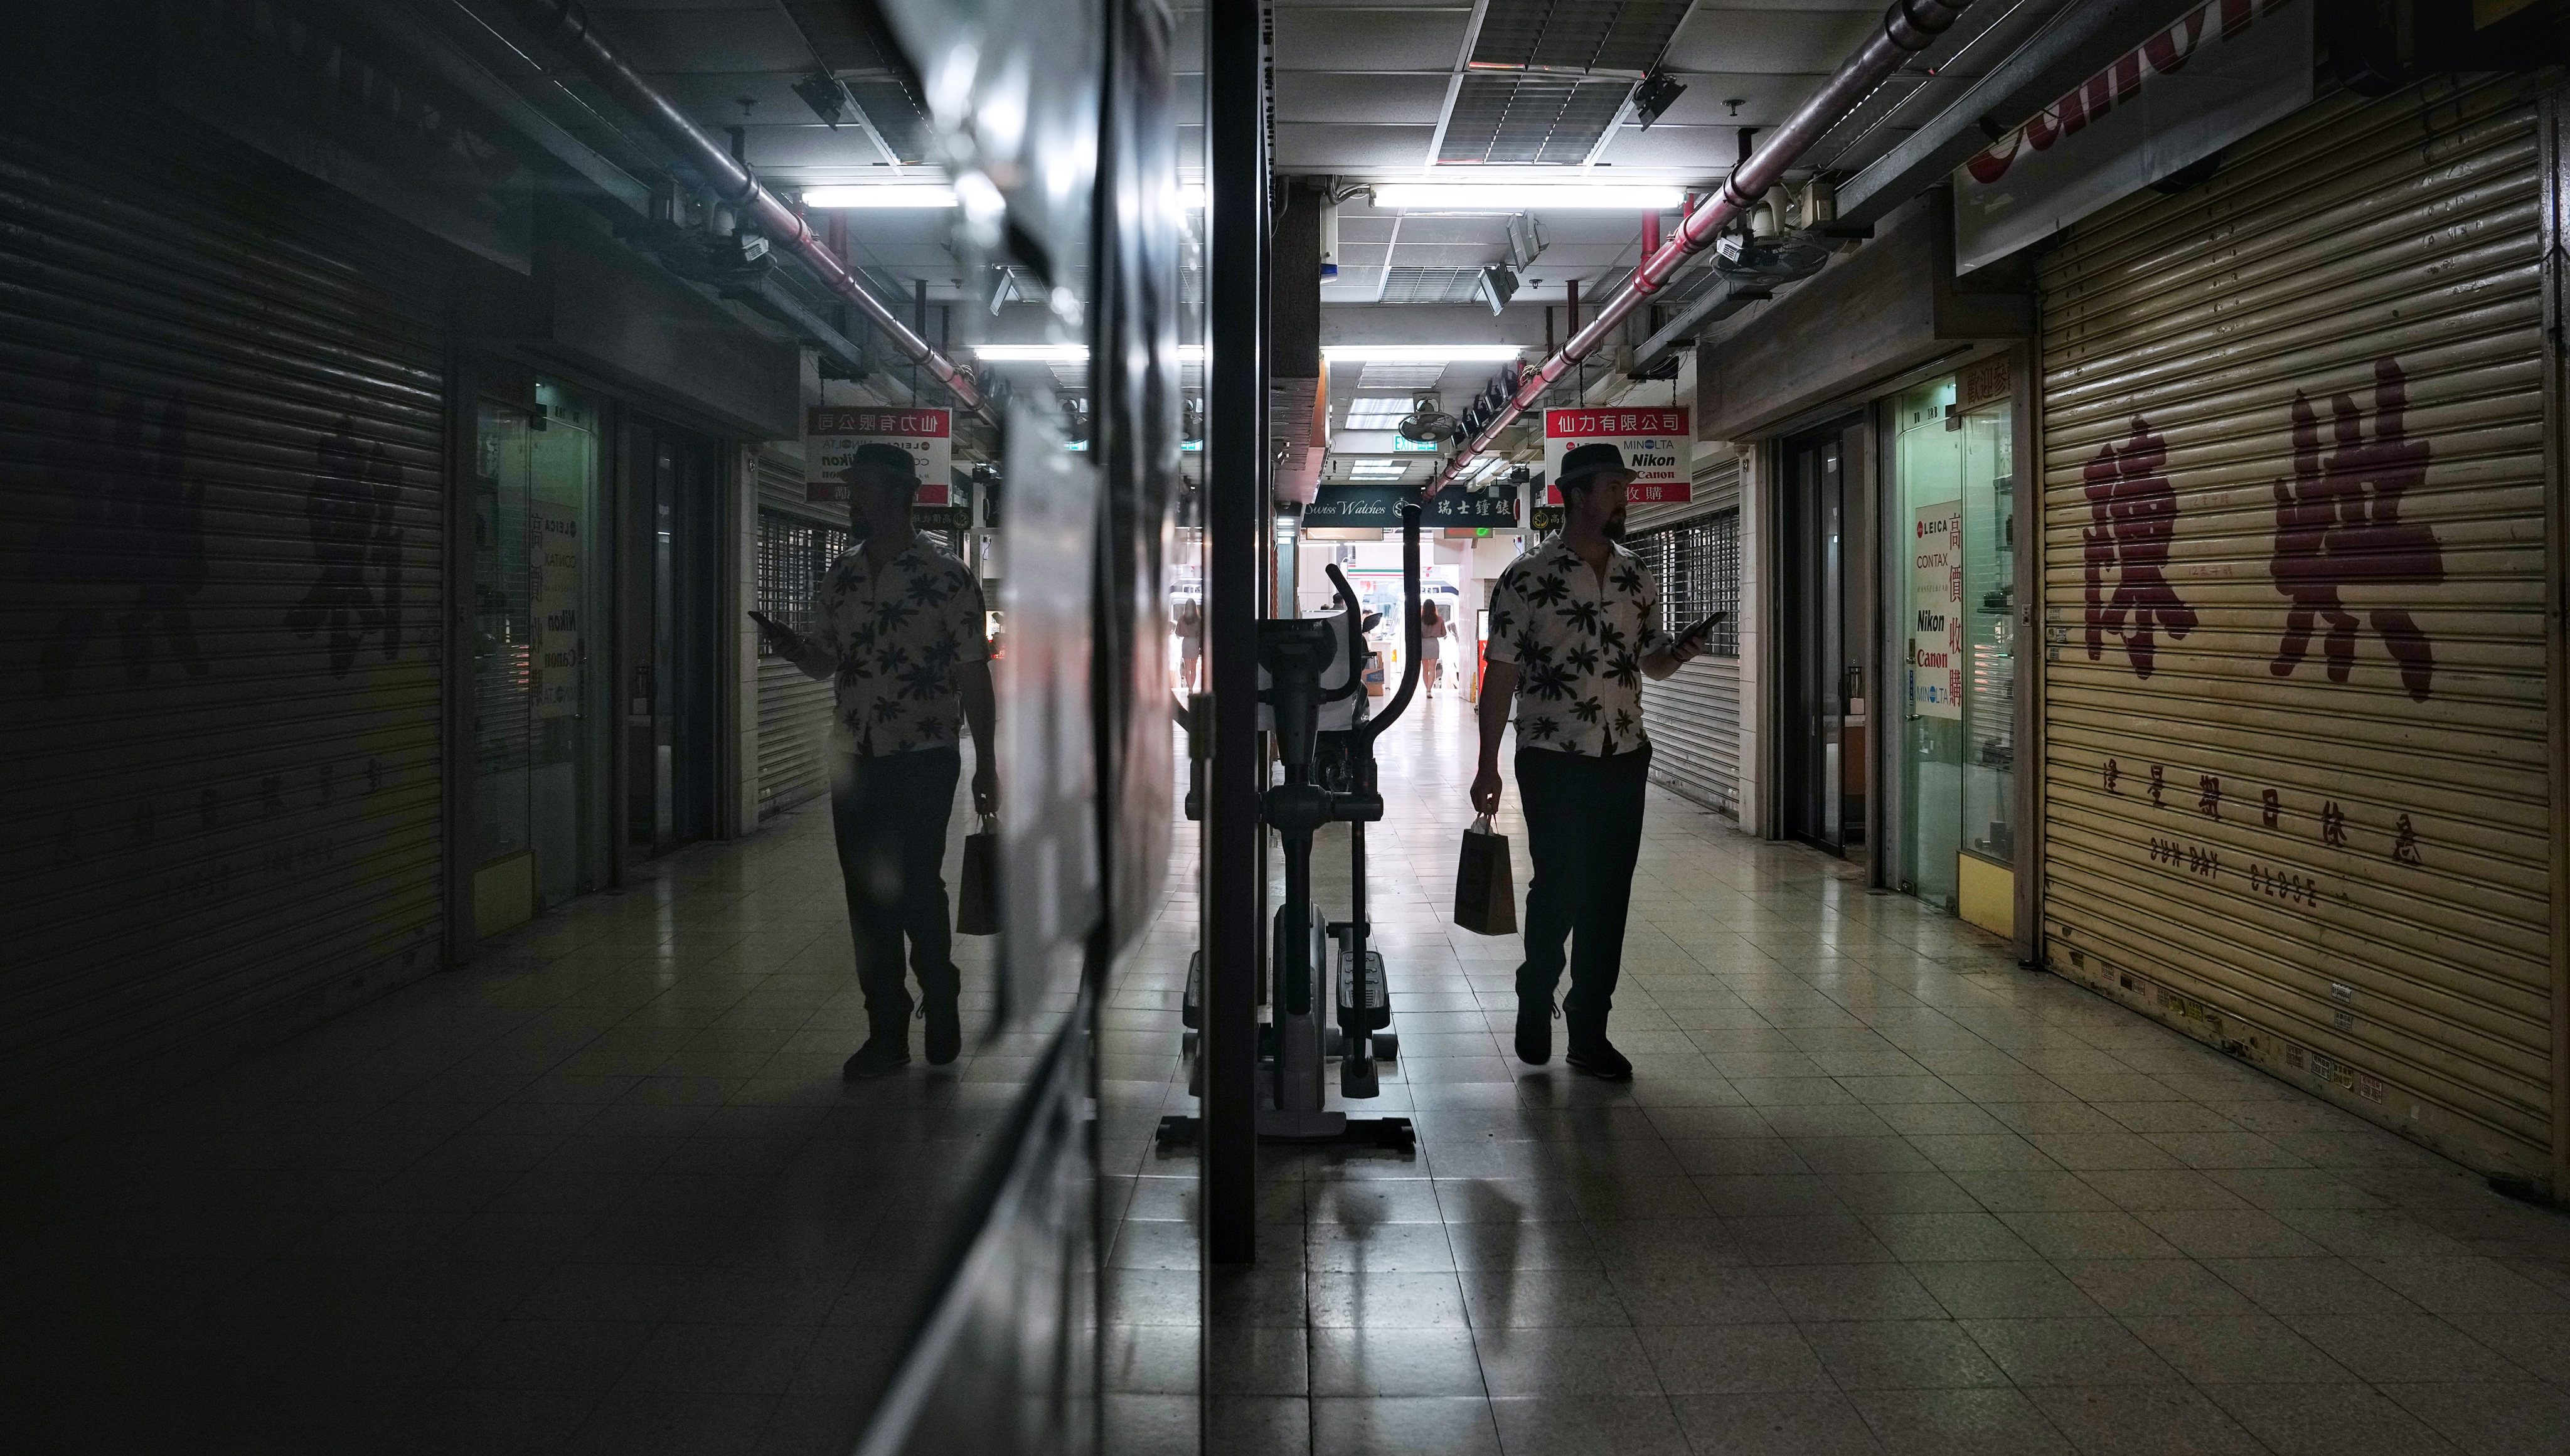 A shopper walks through Champagne Court in Tsim Sha Tsui on October 26. The 65-year-old shopping centre has been sold and earmarked for demolition, another example of Hong Kong retailers struggling to recover amid years of disruption and changing consumer patterns. Photo: Elson LI